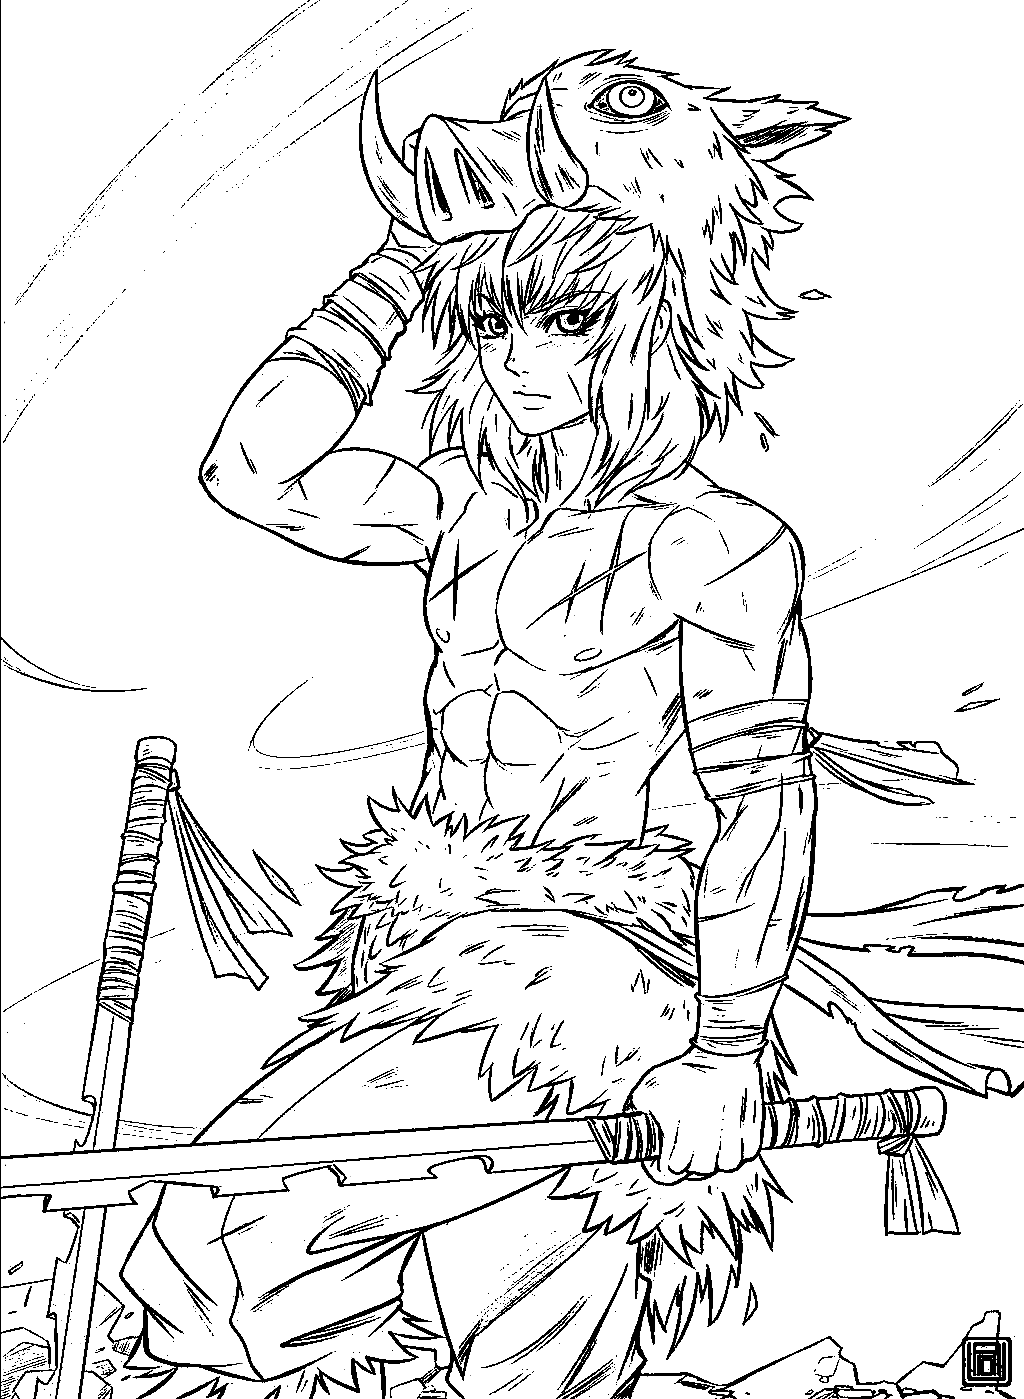 Inosuke took off the mask Coloring Page